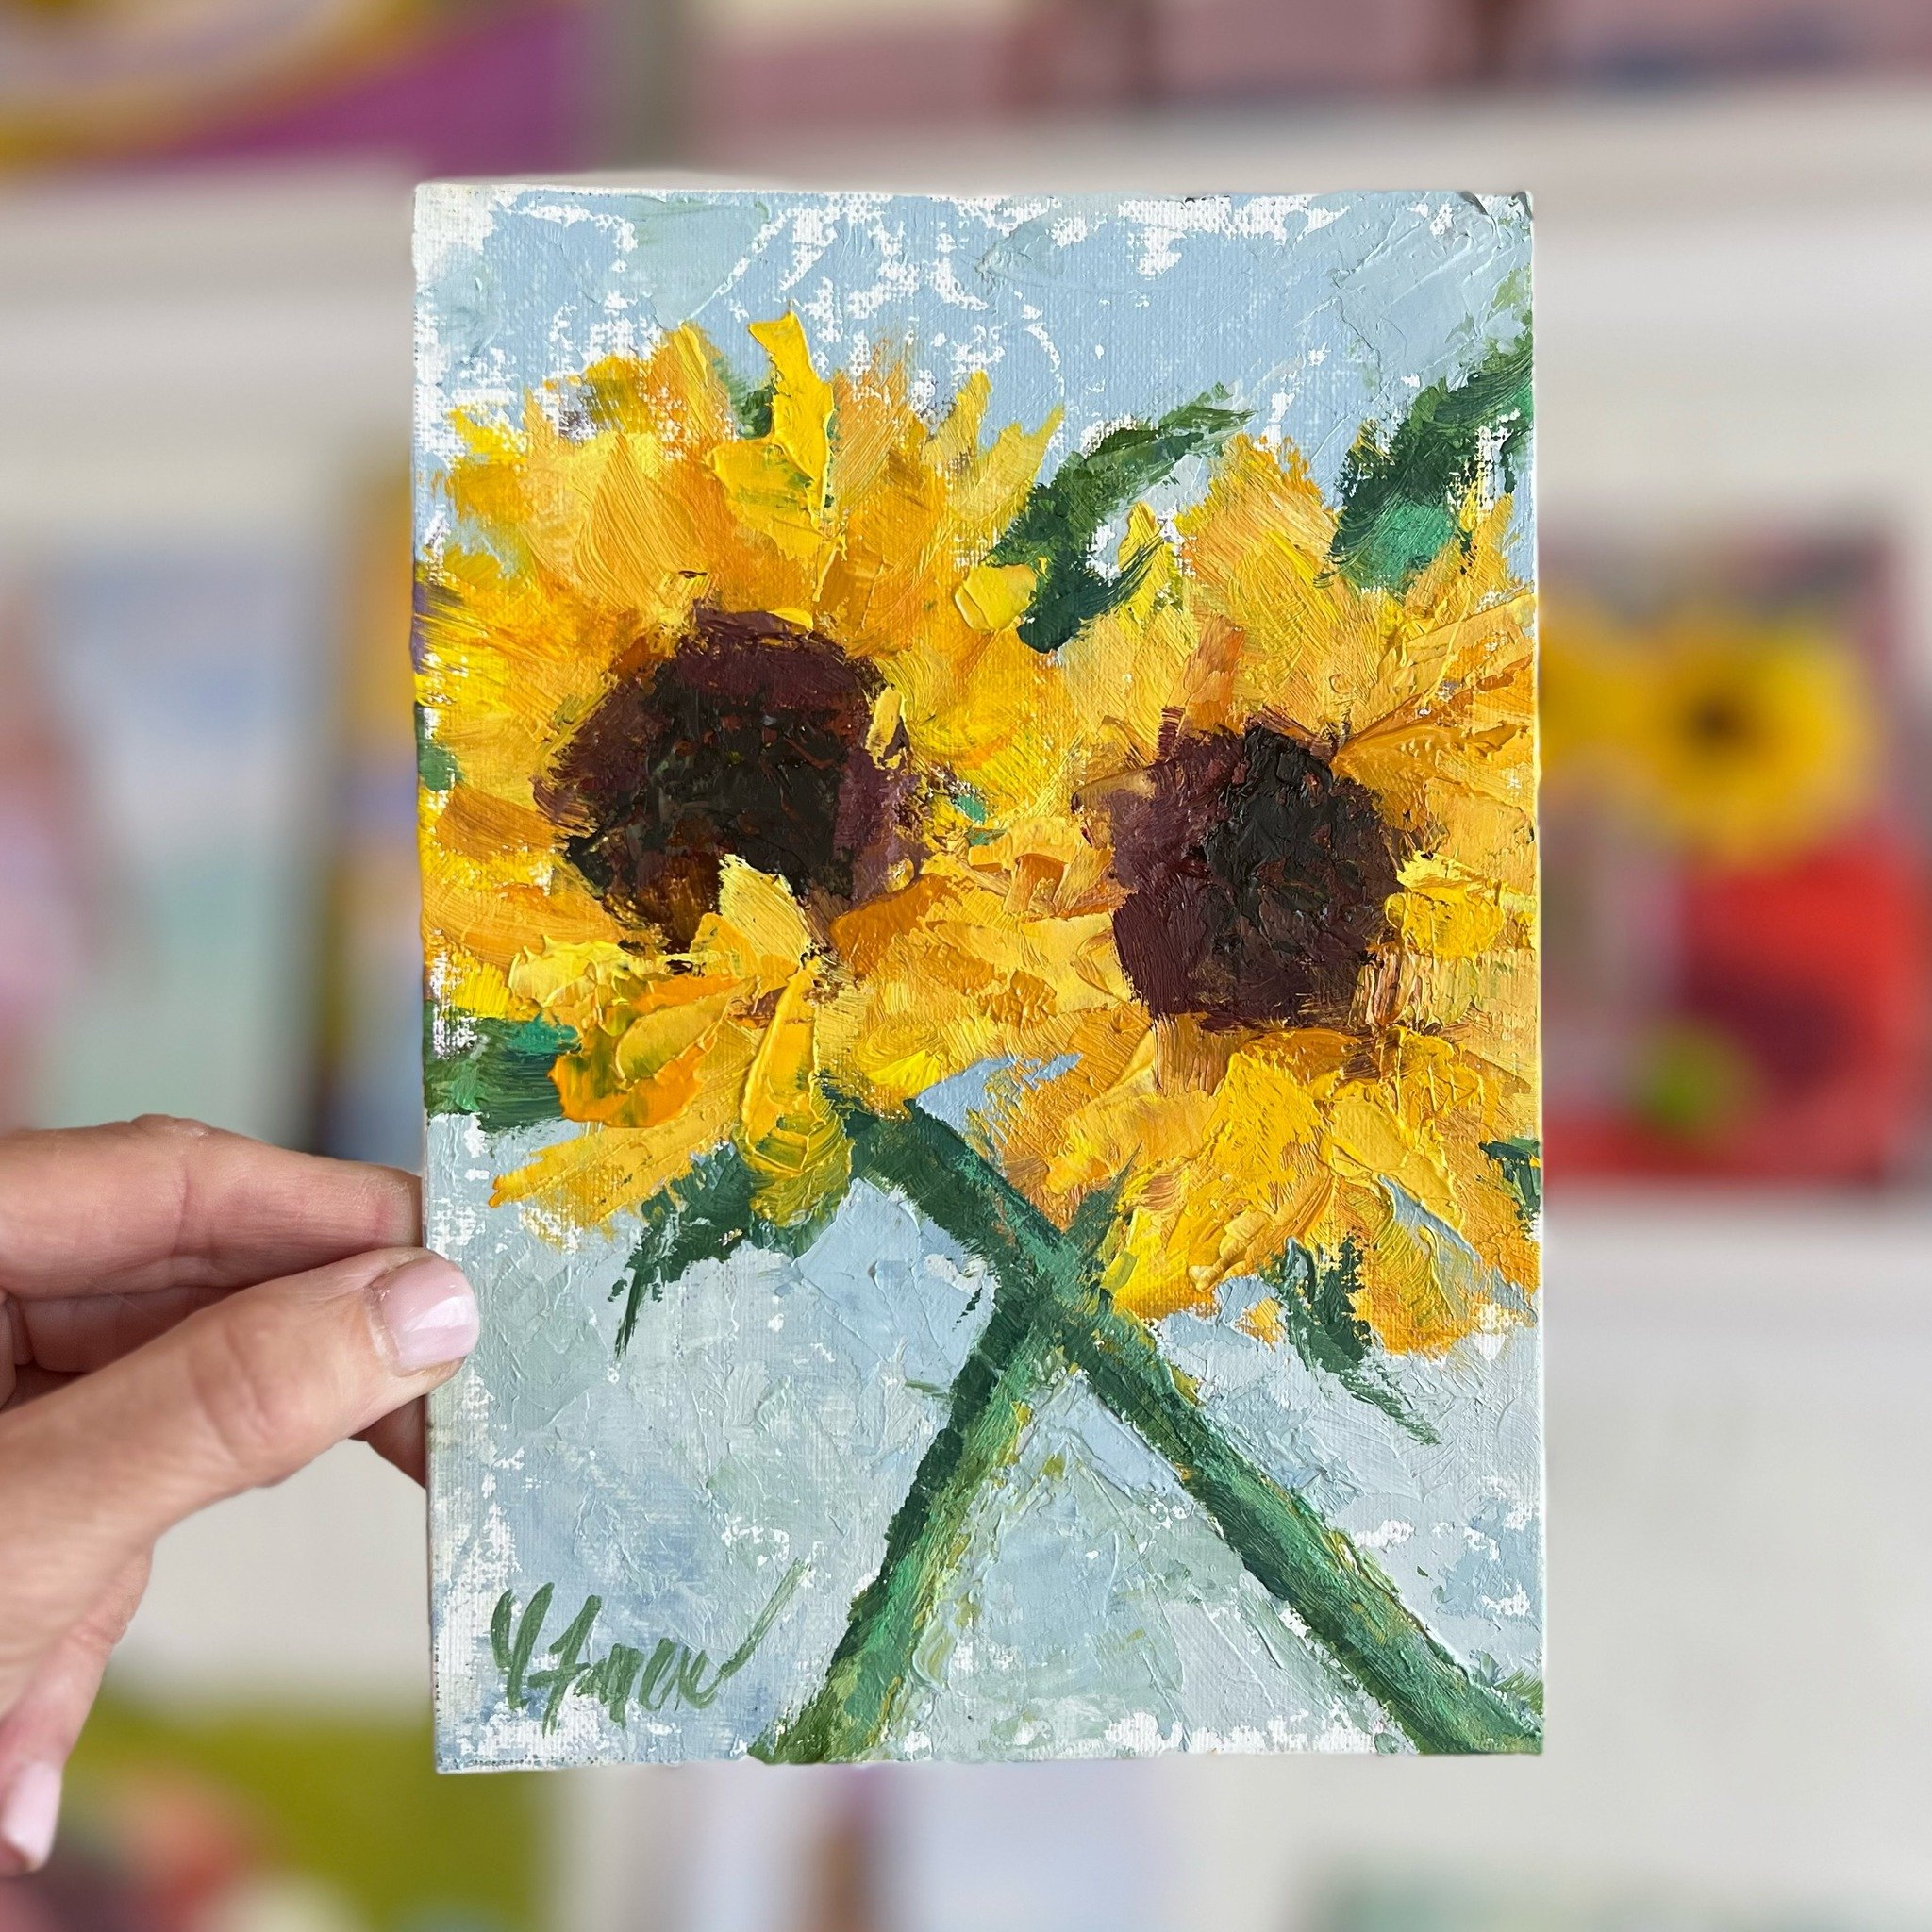 Quick sunflower study with palette knife // 7x5 oil on linen
&bull;
#sunflowers🌻 #oilpainting #colorstudy #stilllifepainting #impressionistart #texture #paletteknifepainting